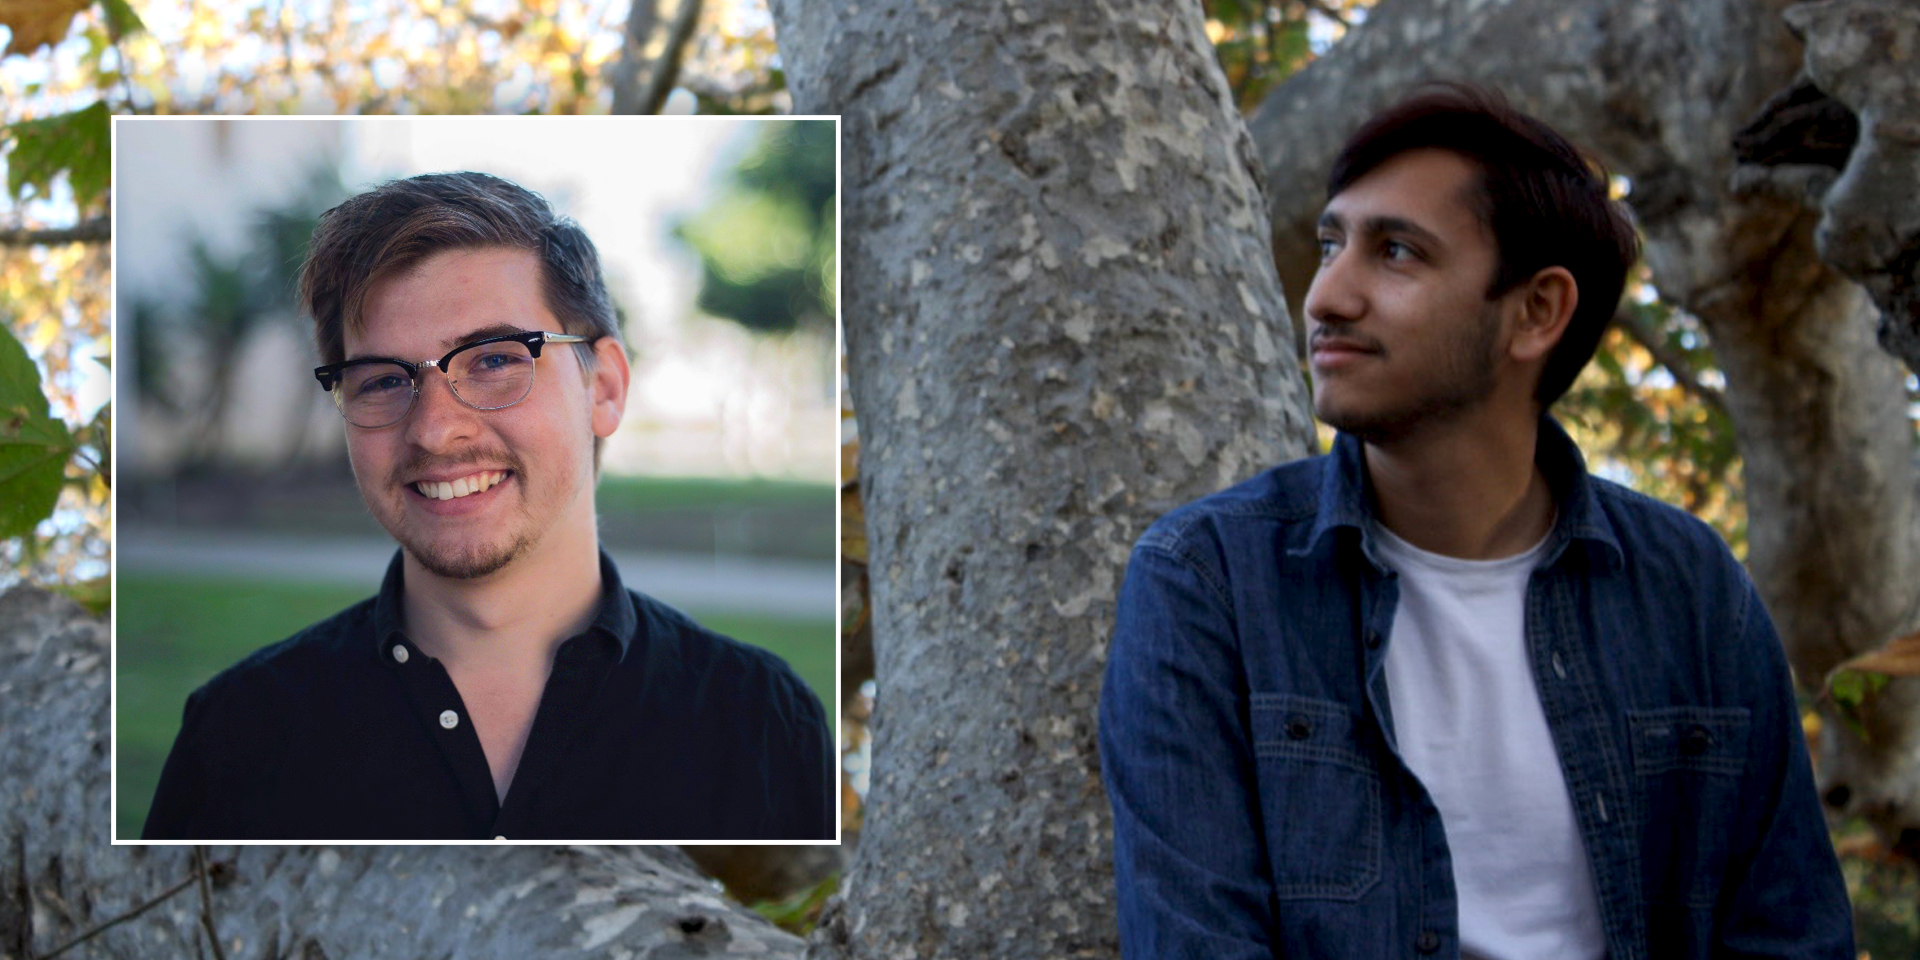 Portraits of Kyle Myers and Tristan Perez in nature.